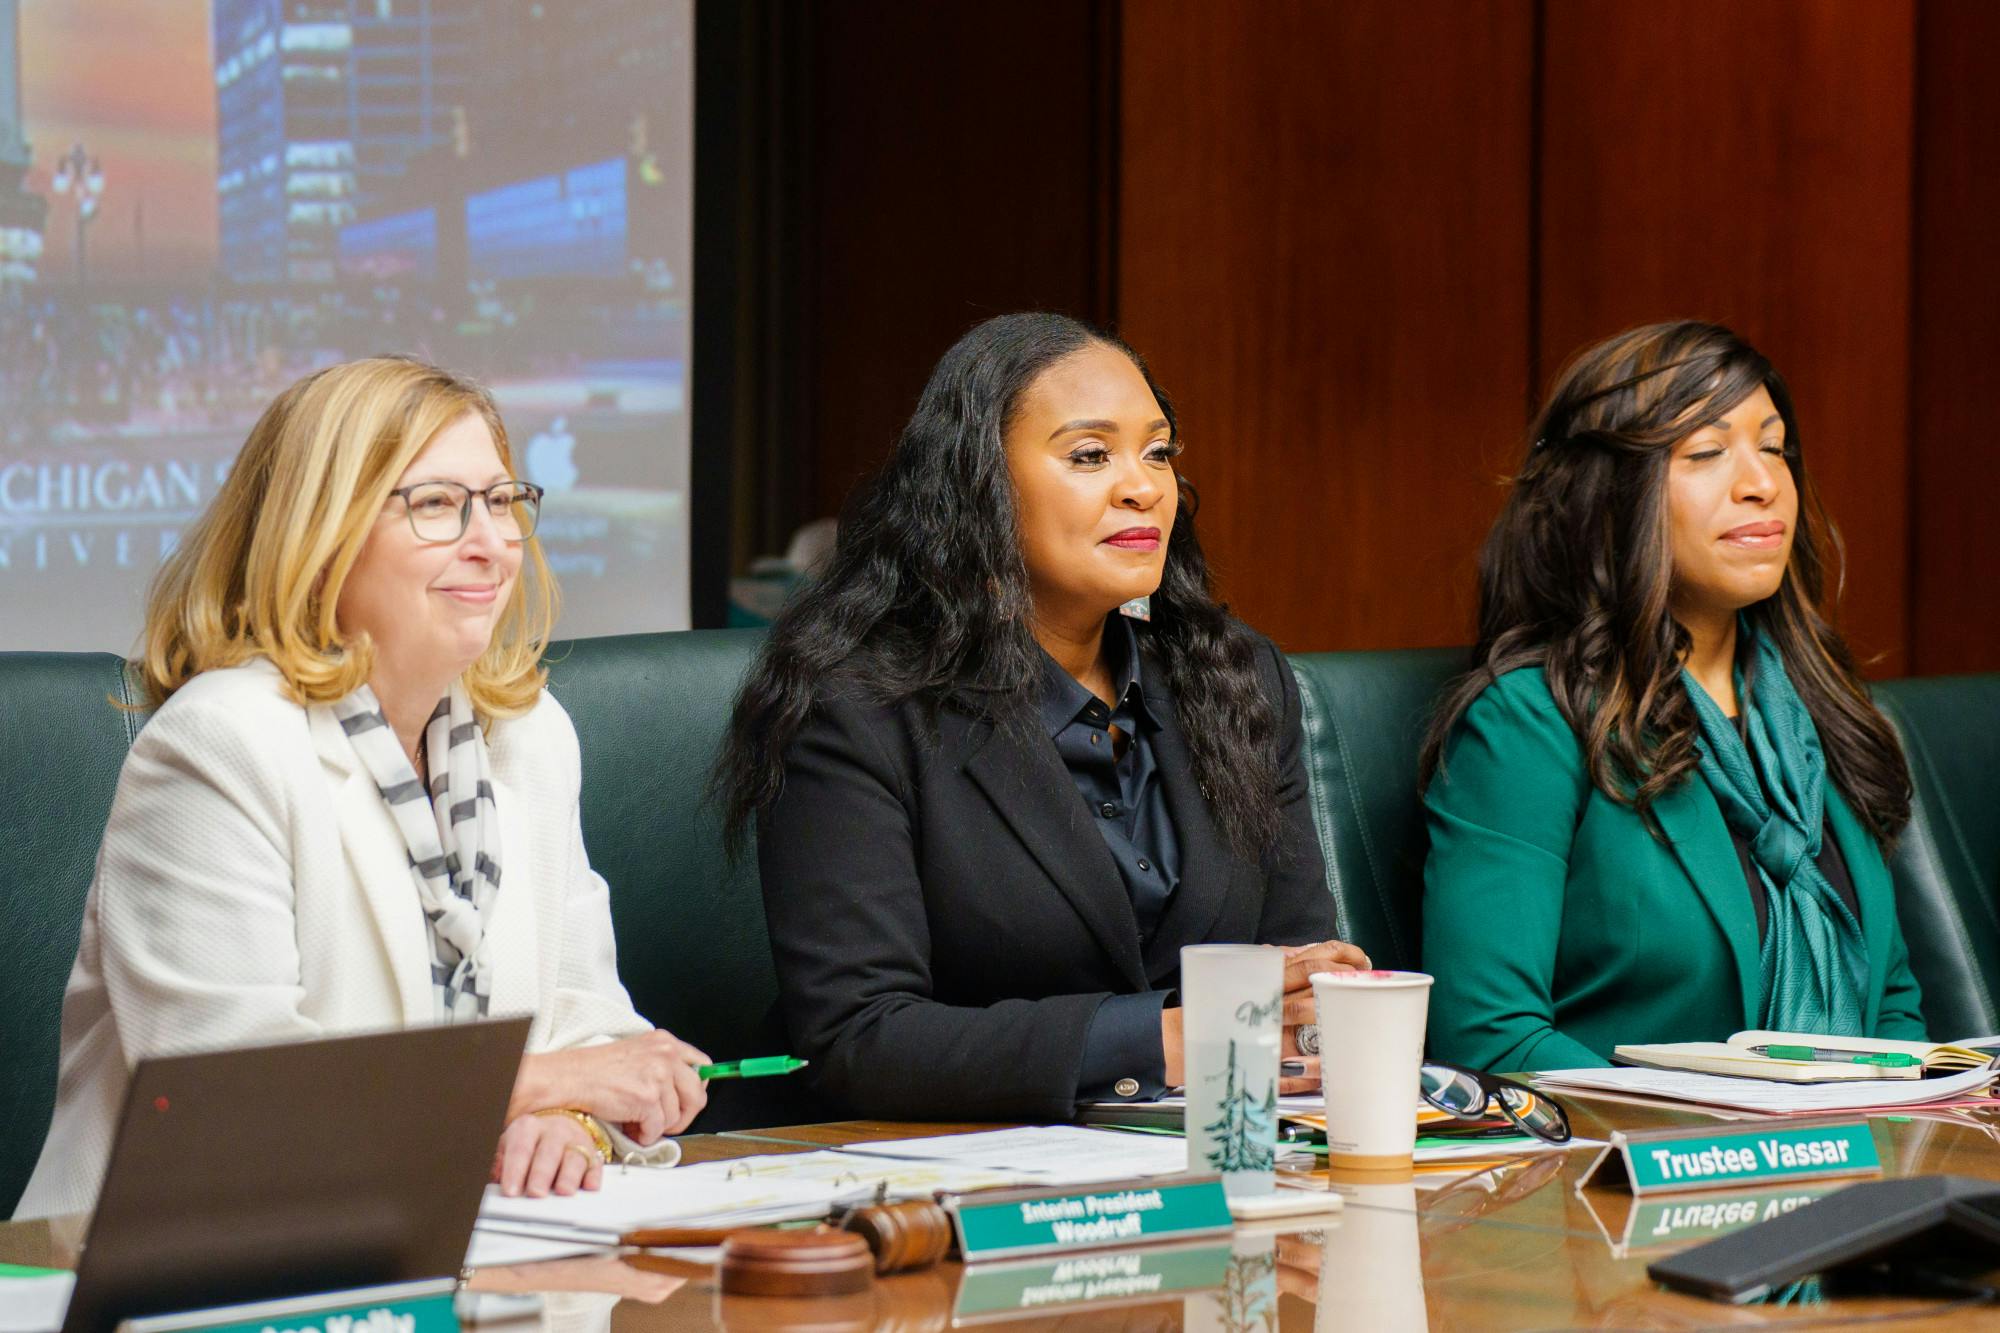 <p>MSU Interim President Woodruff alongside Trustee's Vassar and Scott listening to public comments during a Board of Trustees meeting, held at the Hannah Administration Building on Feb. 10, 2023.</p>